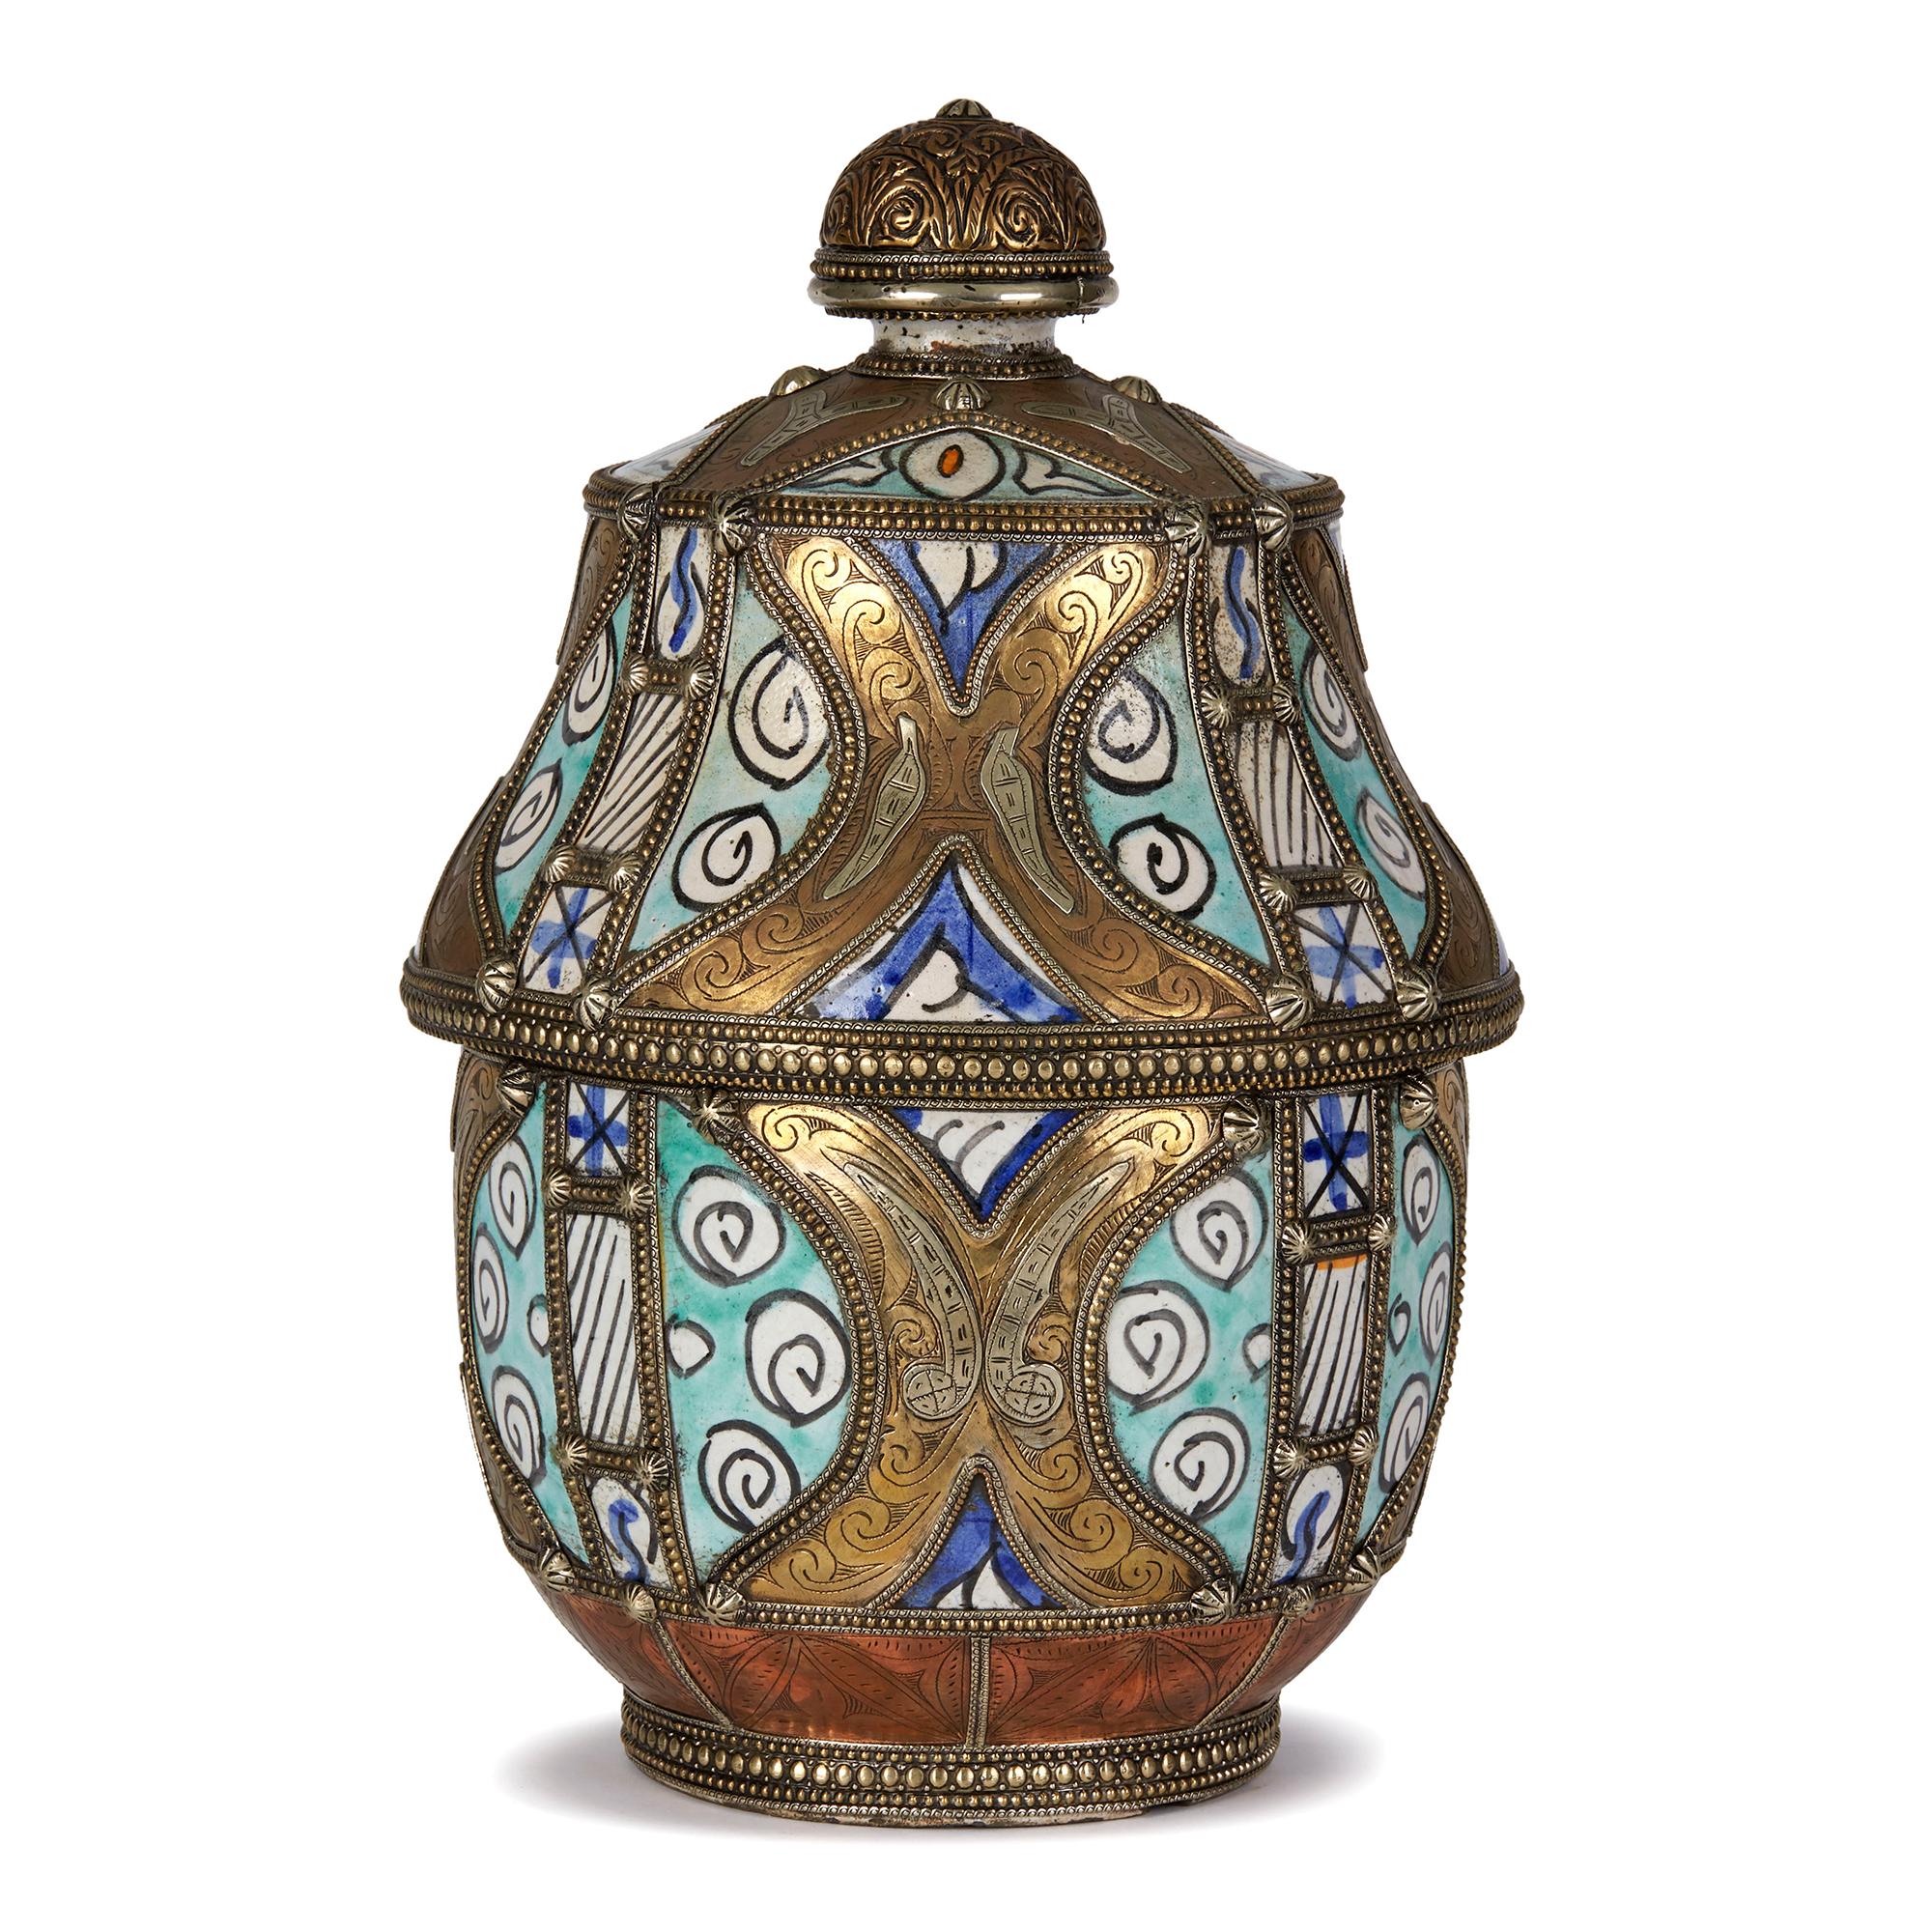 Antique Moroccan 'Jobbana' ceramic lidded butter pot glazed with blue, turquoise and orange with black patterned outlines on a white ground decoration with ornate etched white metal, copper and brass mounts with beaded rims around the edges, the